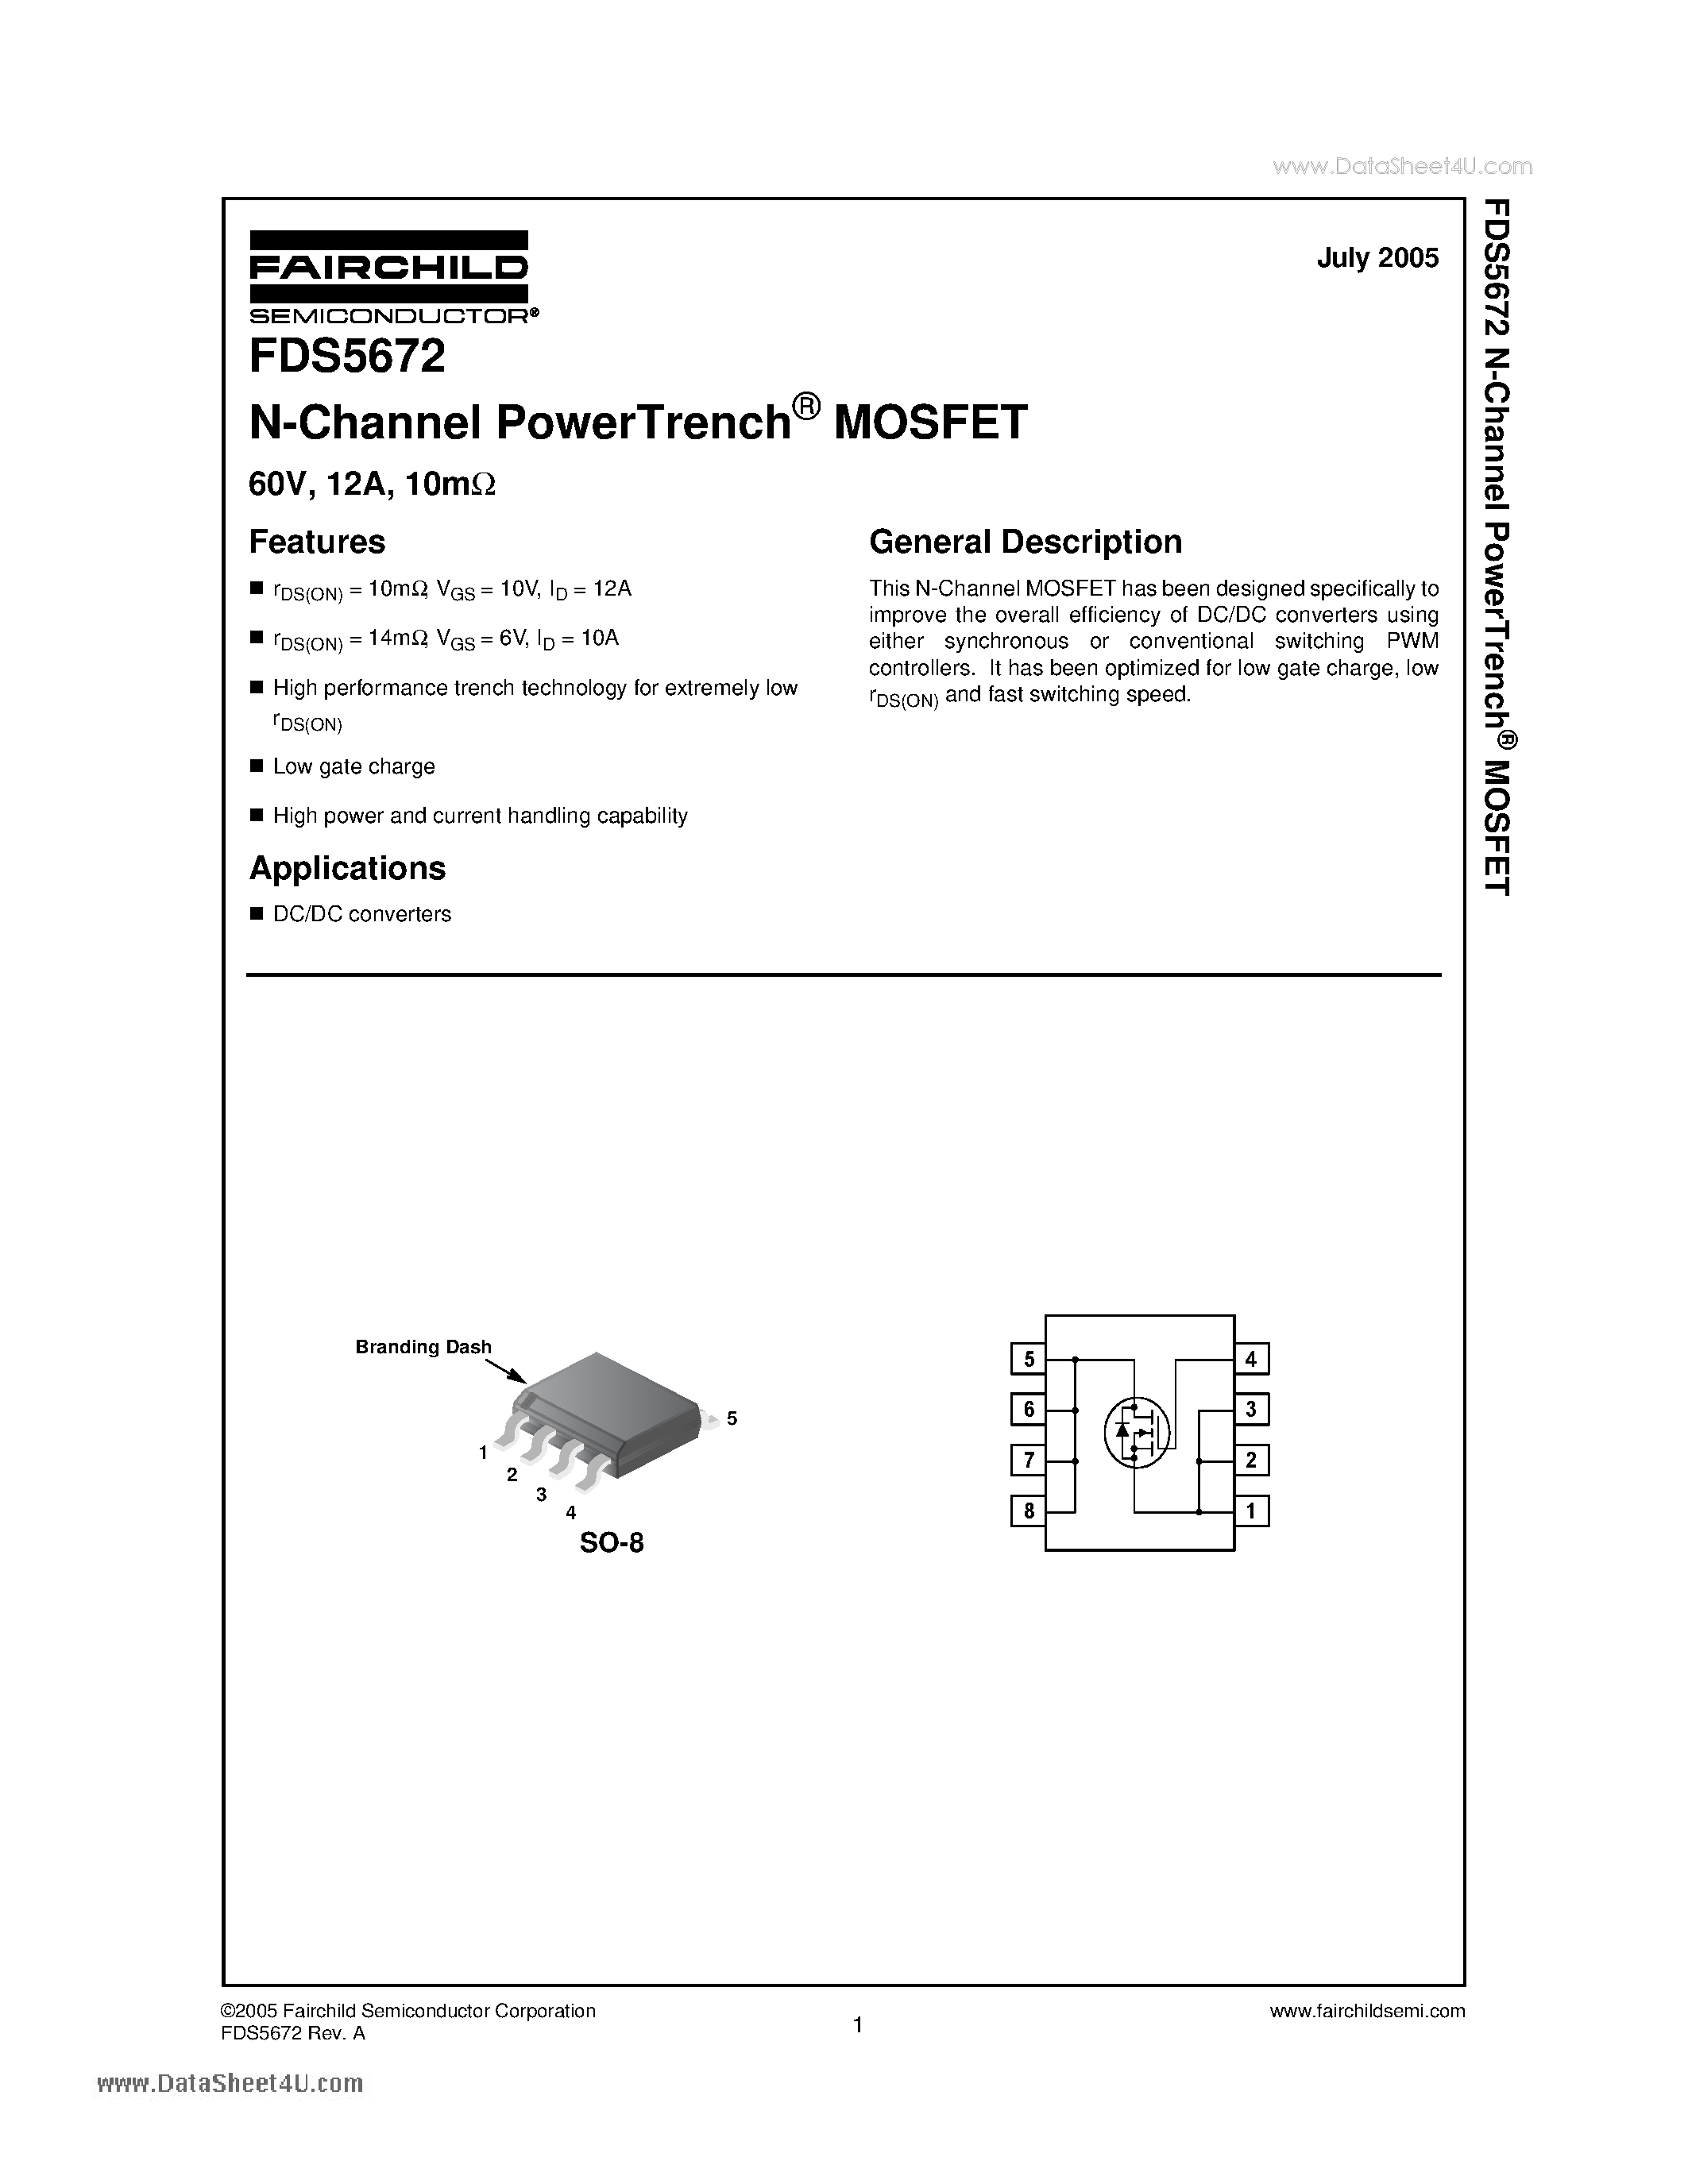 Datasheet FDS5672 - N-Channel PowerTrench MOSFET page 1